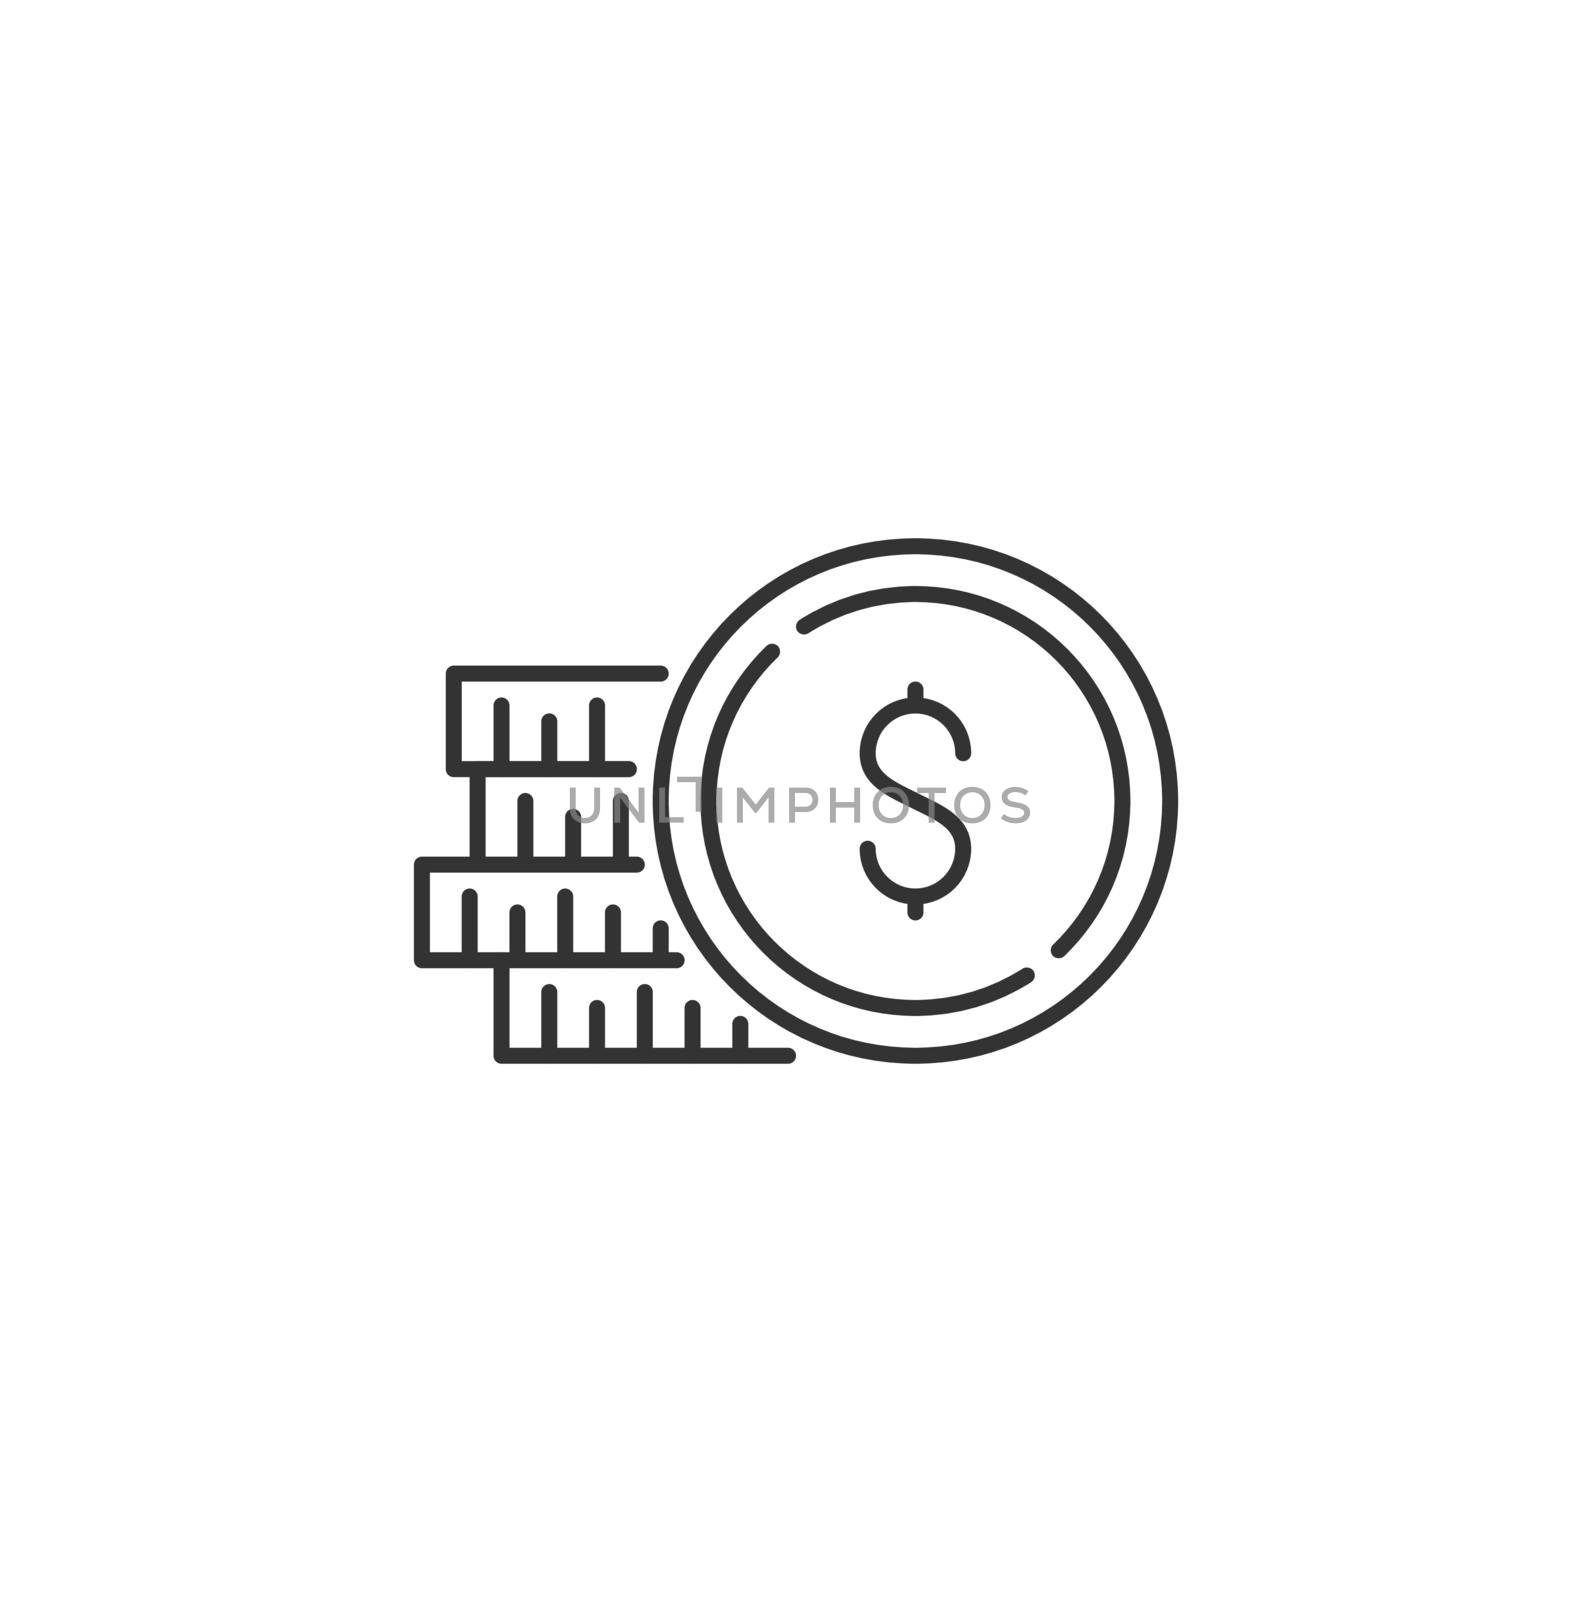 Coins Stack with Dollar Related Vector Line Icon. Sign Isolated on the White Background. Editable Stroke EPS file. Vector illustration.